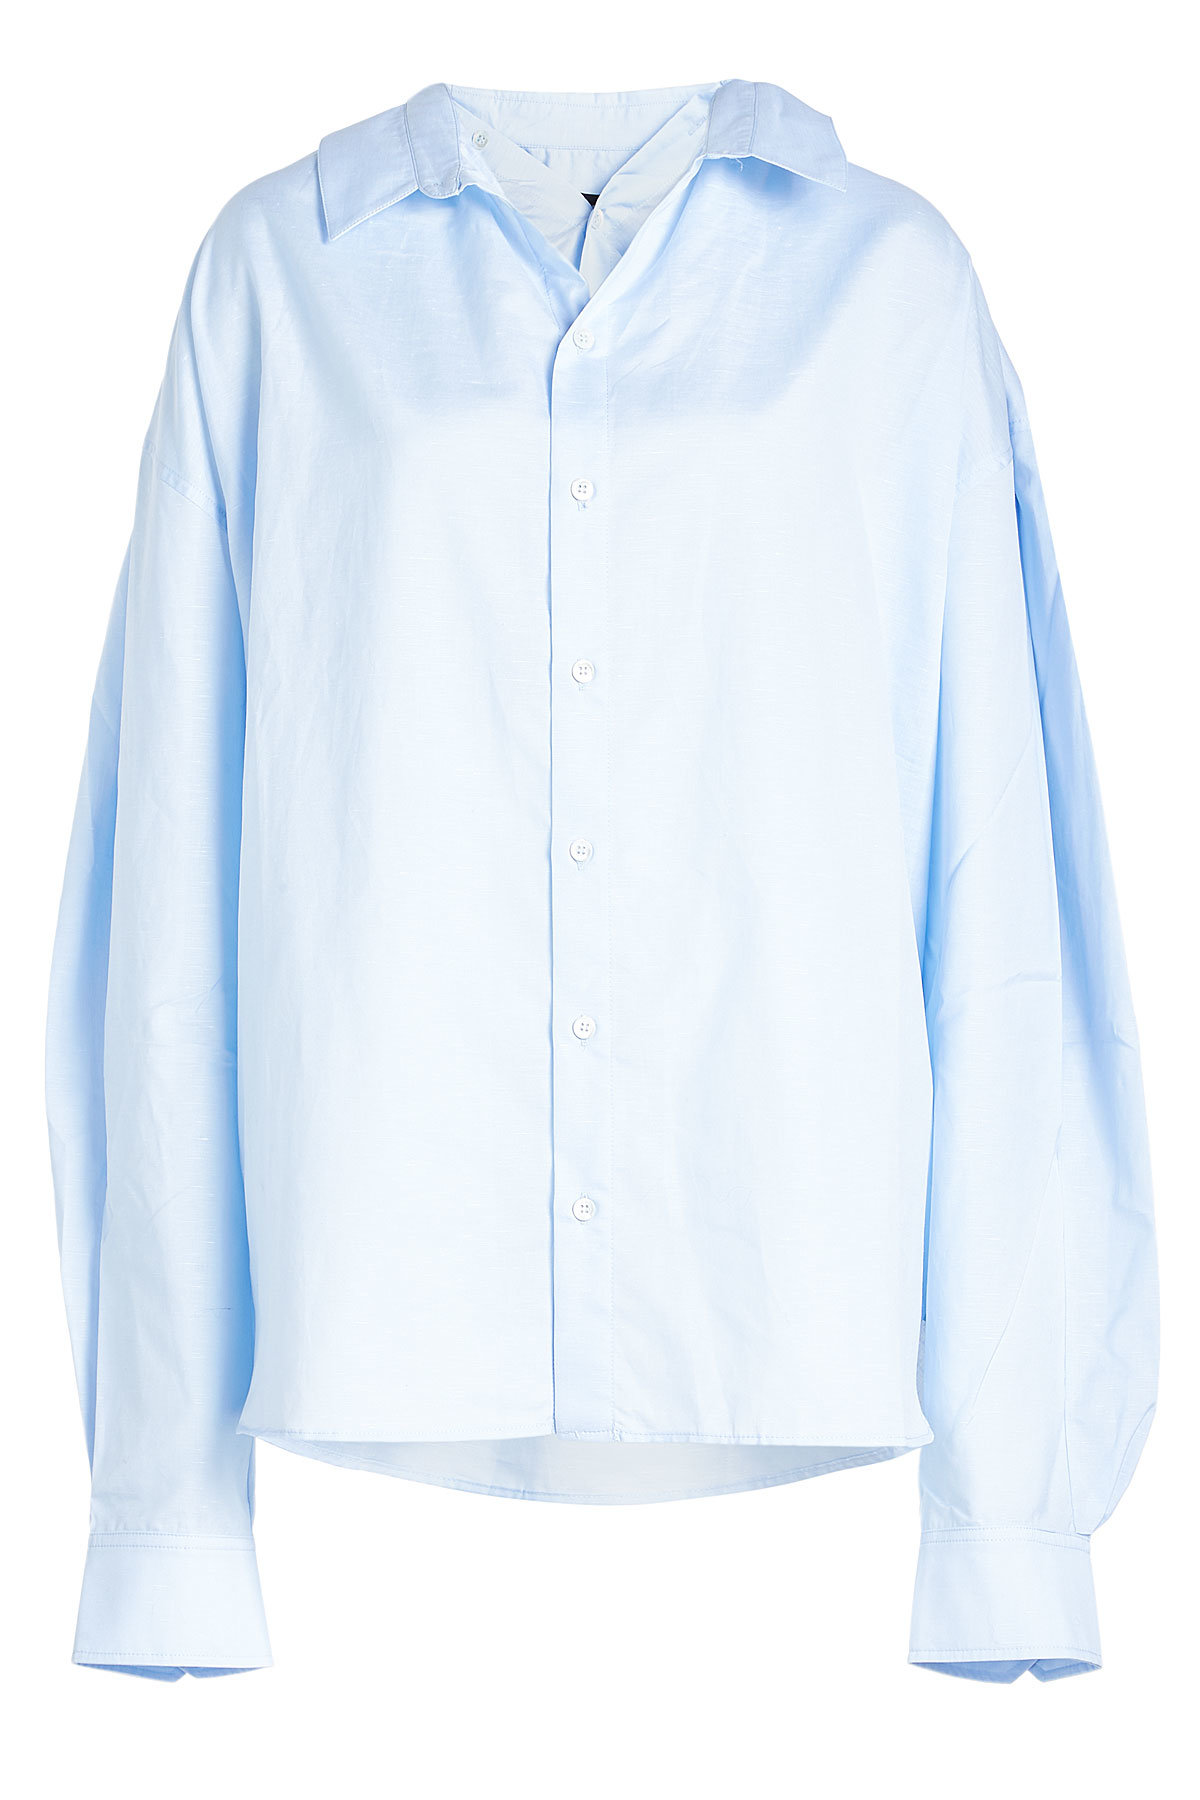 Y/Project - Double Layered Cotton Shirt